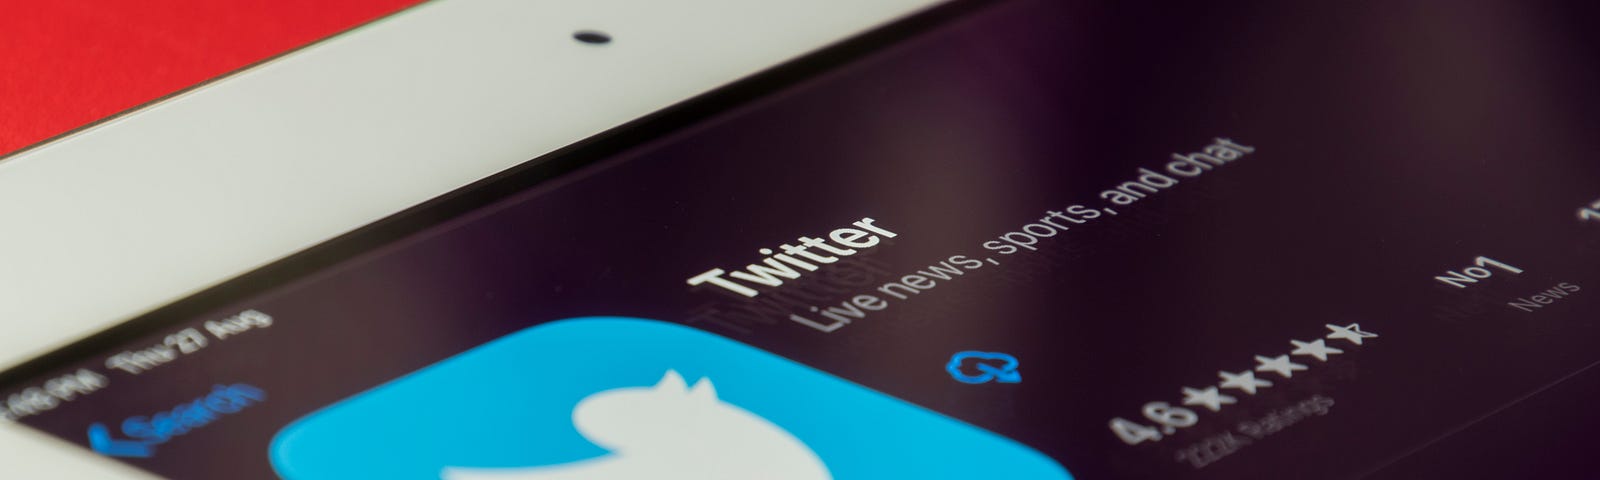 Image of Twitter app on a tablet or phone screen.